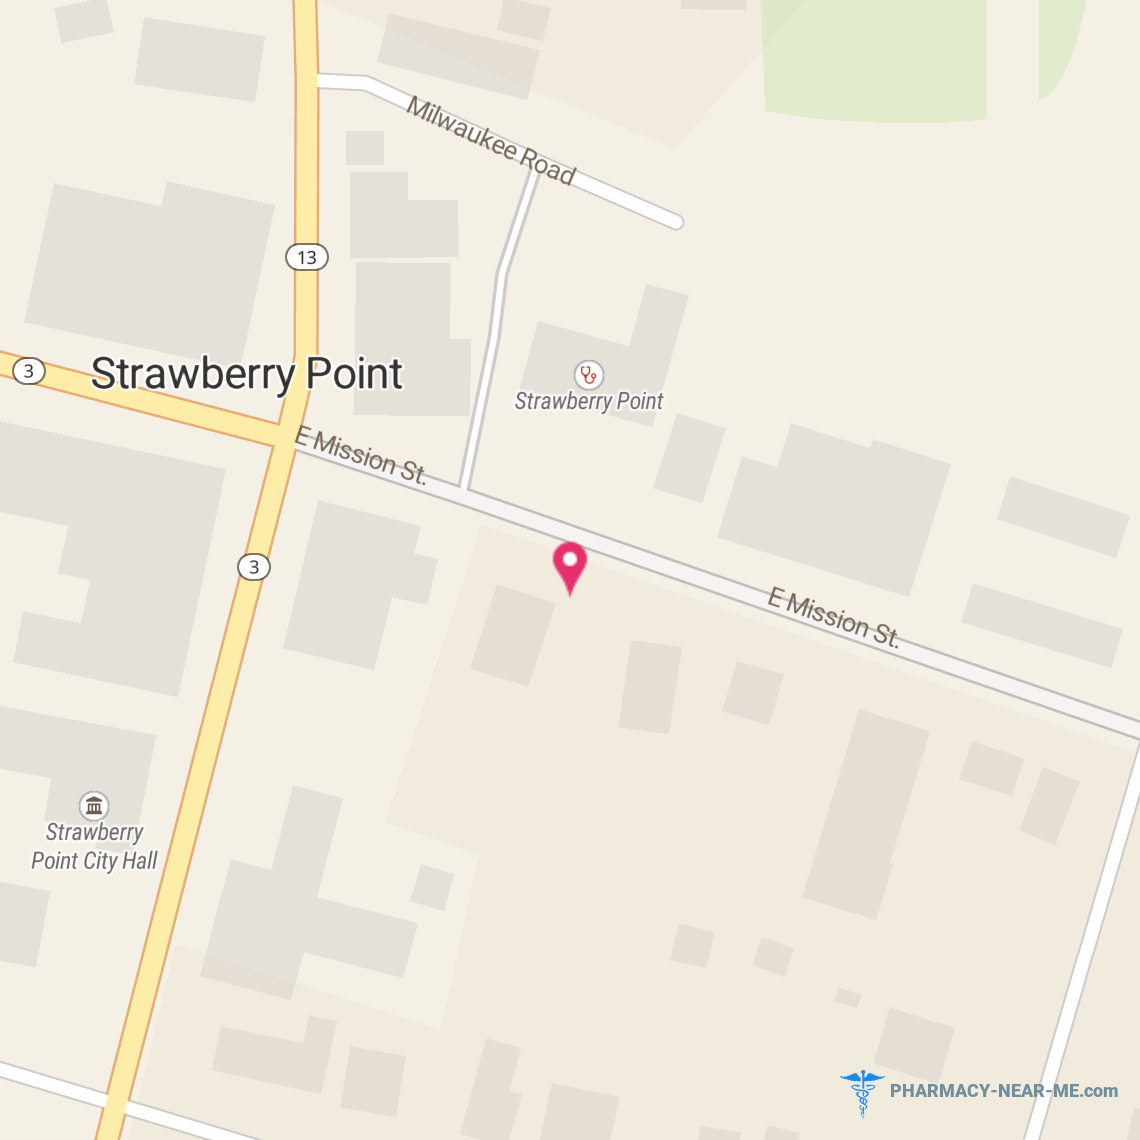 STRAWBERRY POINT DRUG - Pharmacy Hours, Phone, Reviews & Information: 104 West Mission Street, Strawberry Point, Iowa 52076, United States